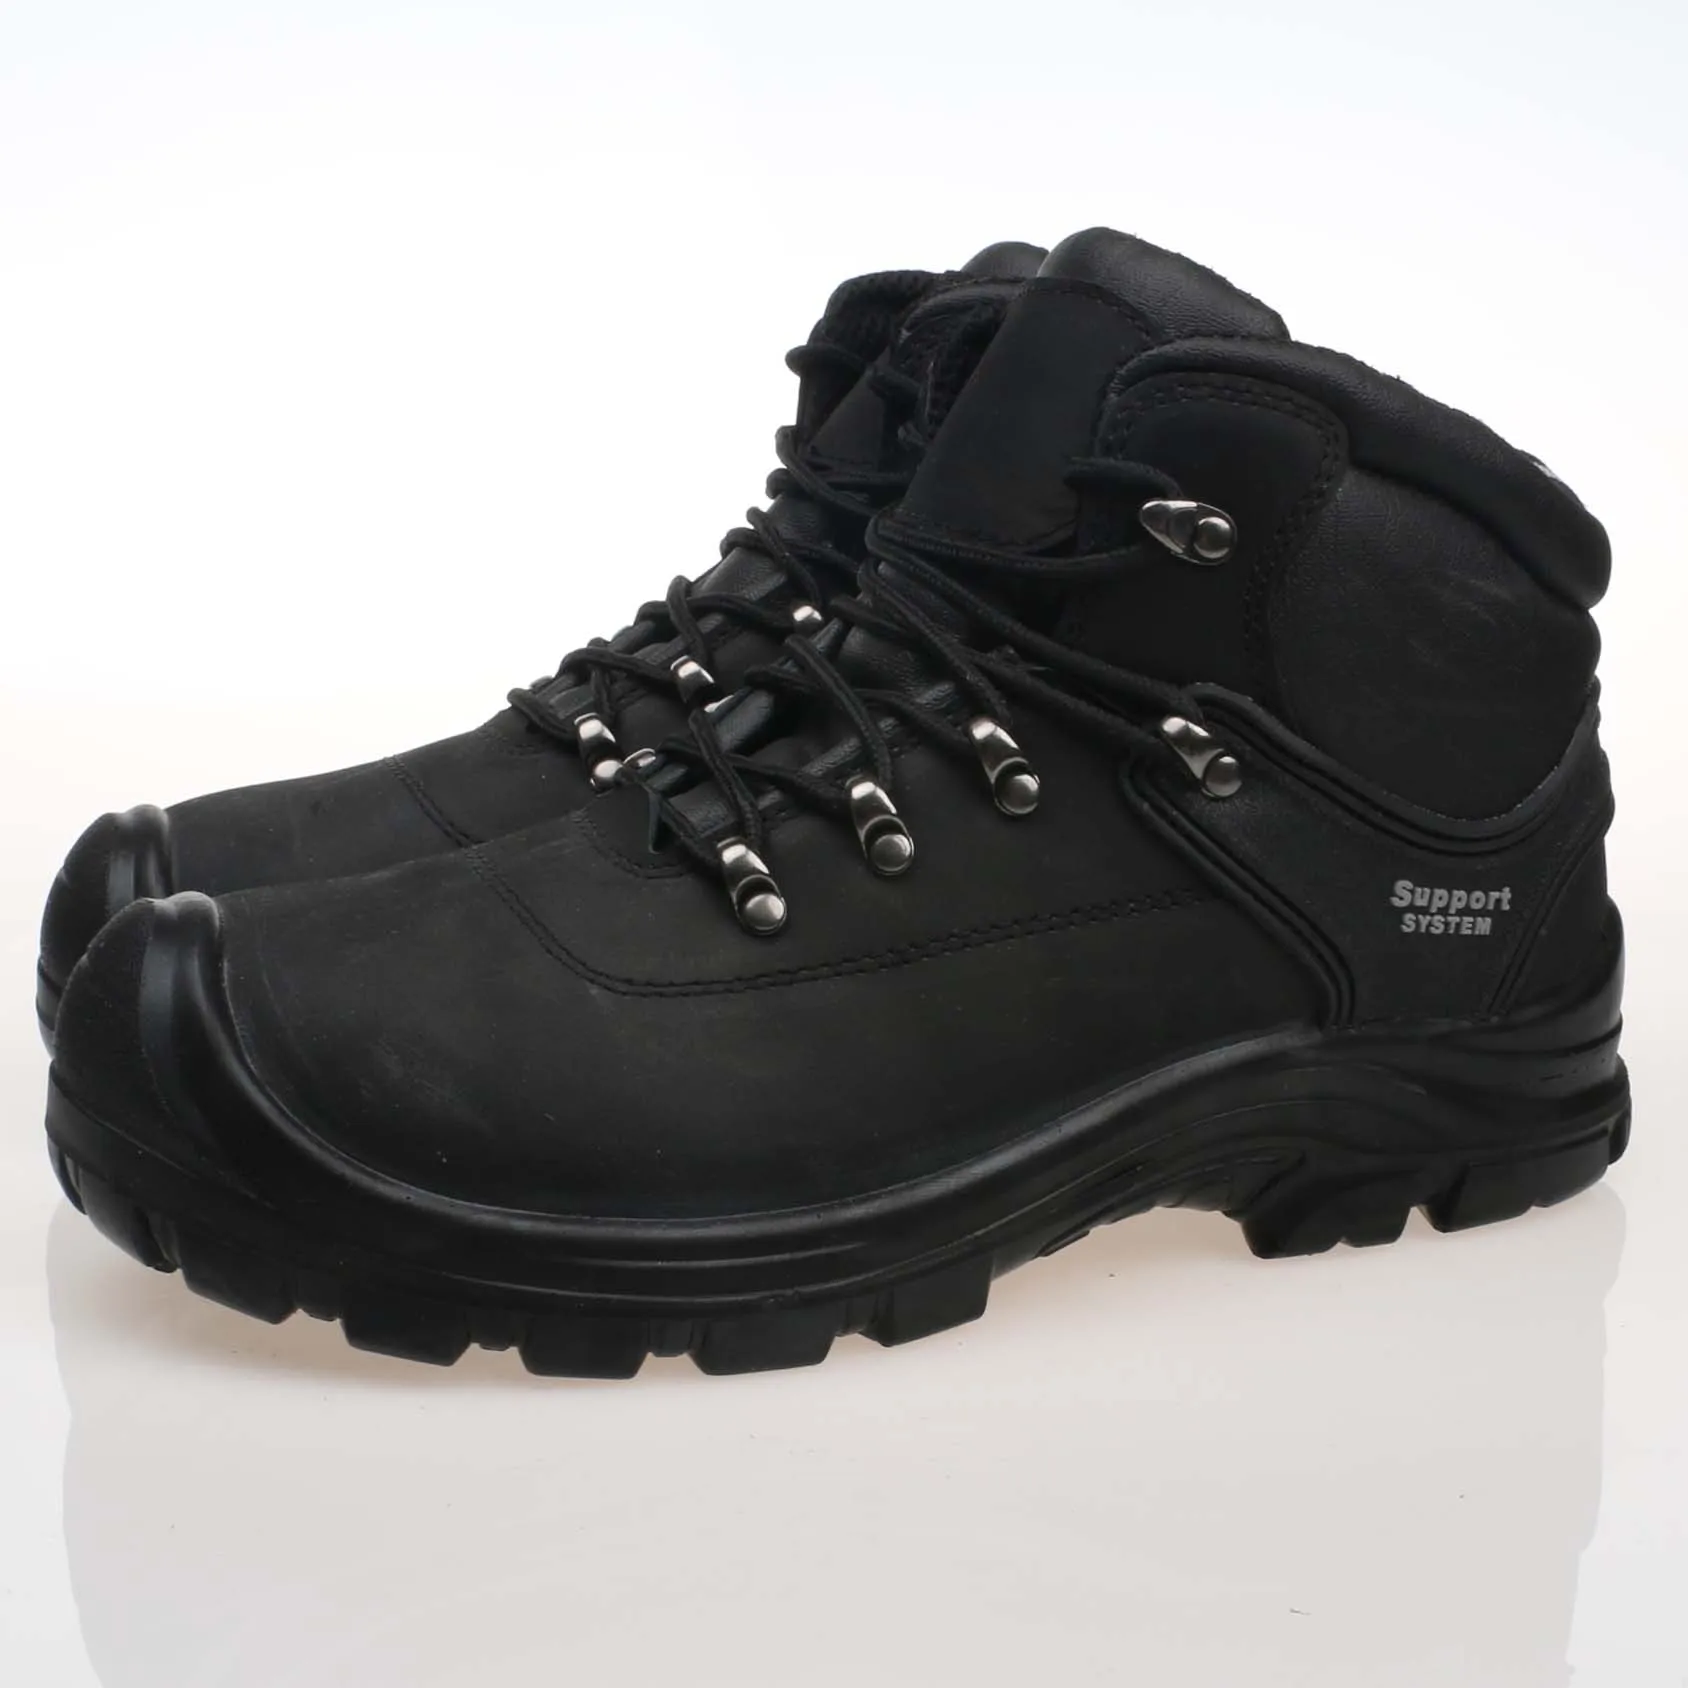 
work supplier working shoes security rubber sole army dms boots waterproof toe protector leather safety shoes in germany  (62243770122)